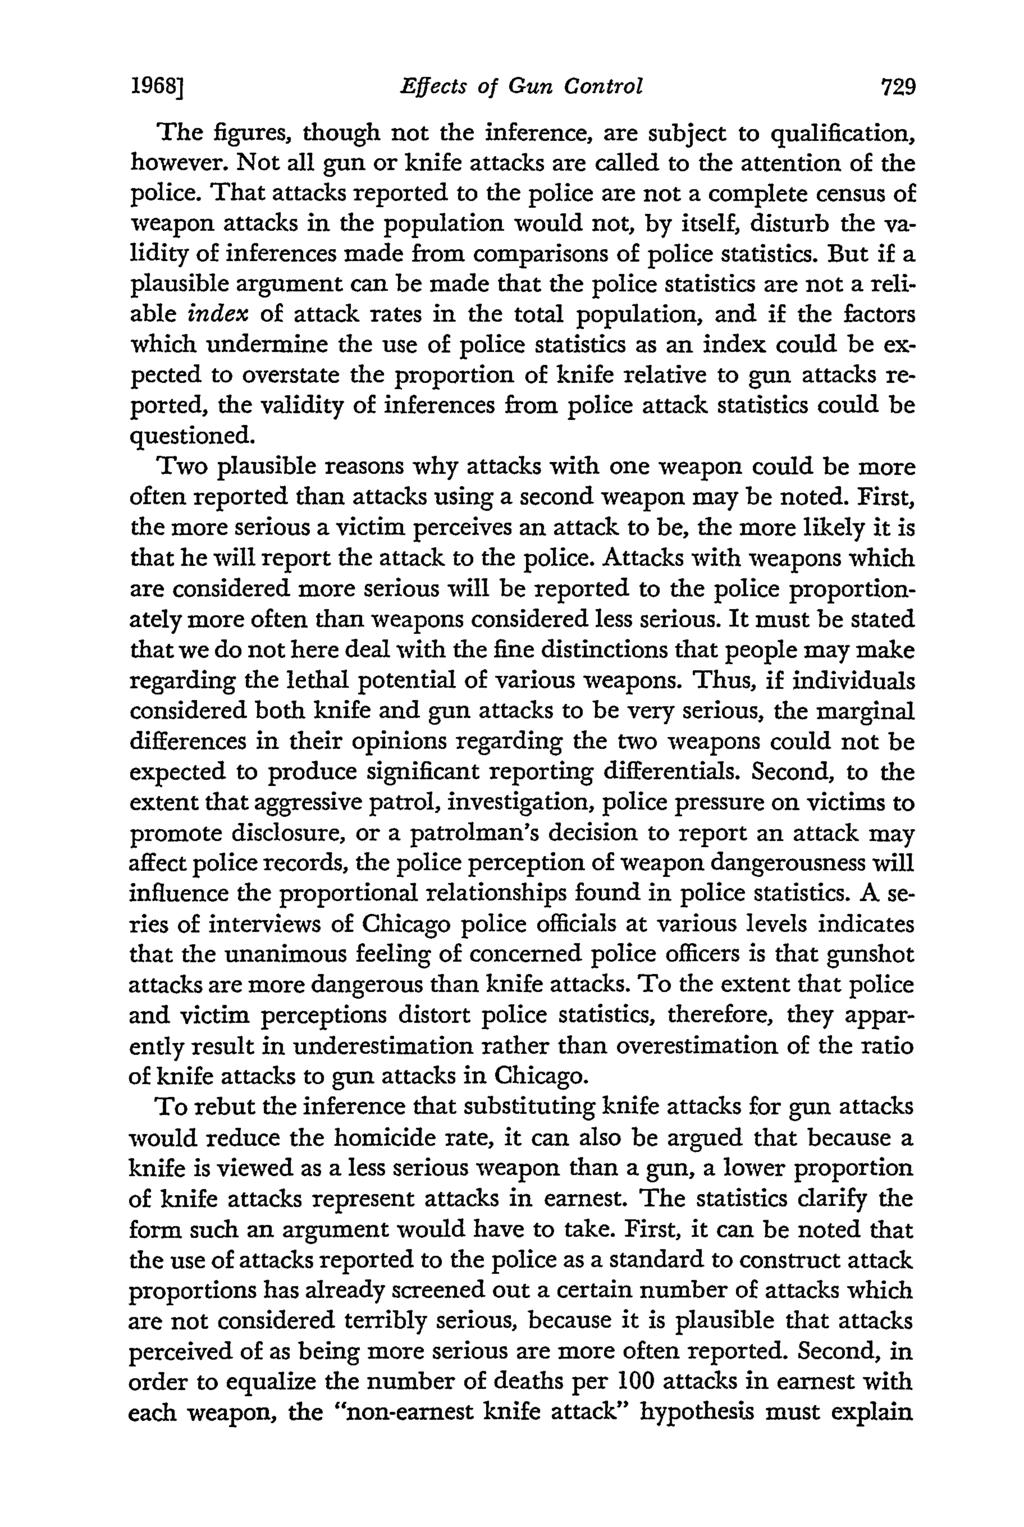 1968] Effects of Gun Control The figures, though not the inference, are subject to qualification, however. Not all gun or knife attacks are called to the attention of the police.